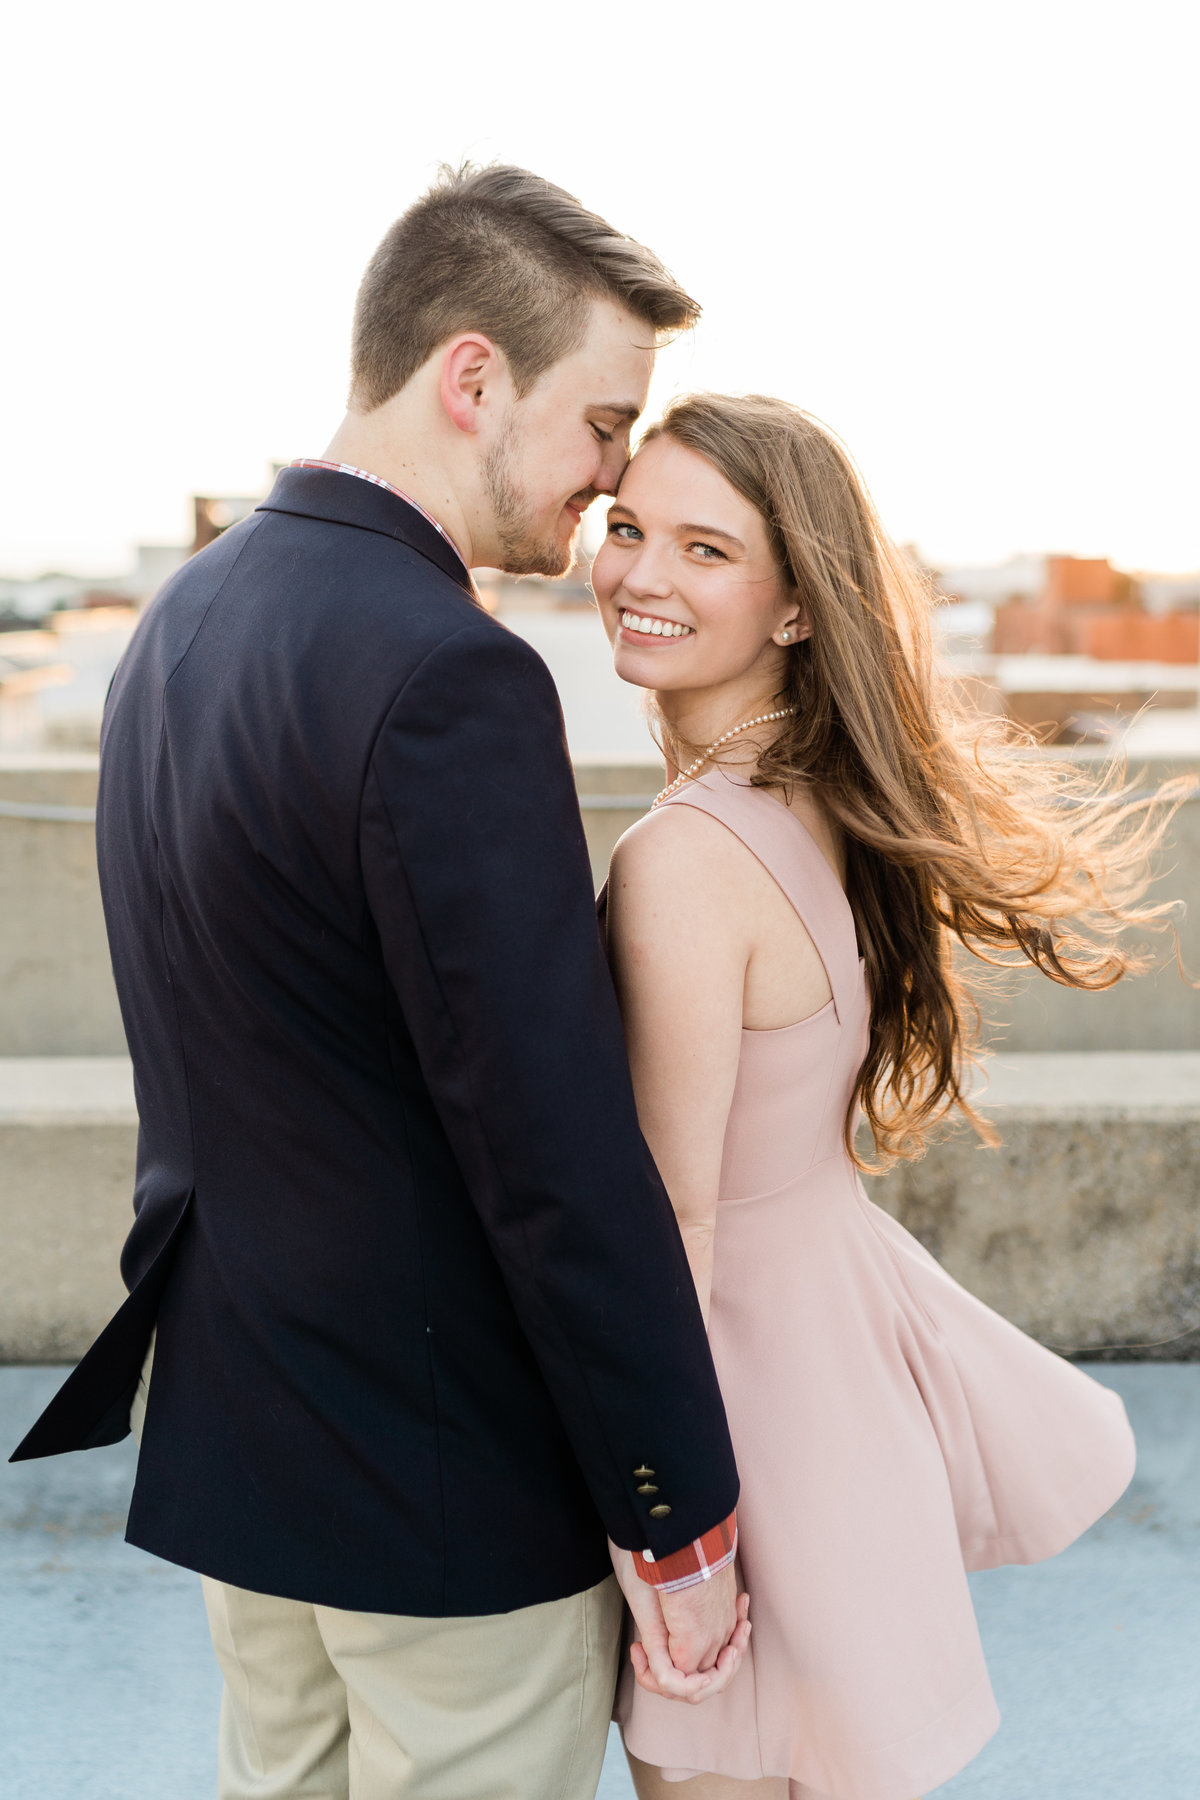 Couple smiling at each other during engagement photoshoot in Alabama